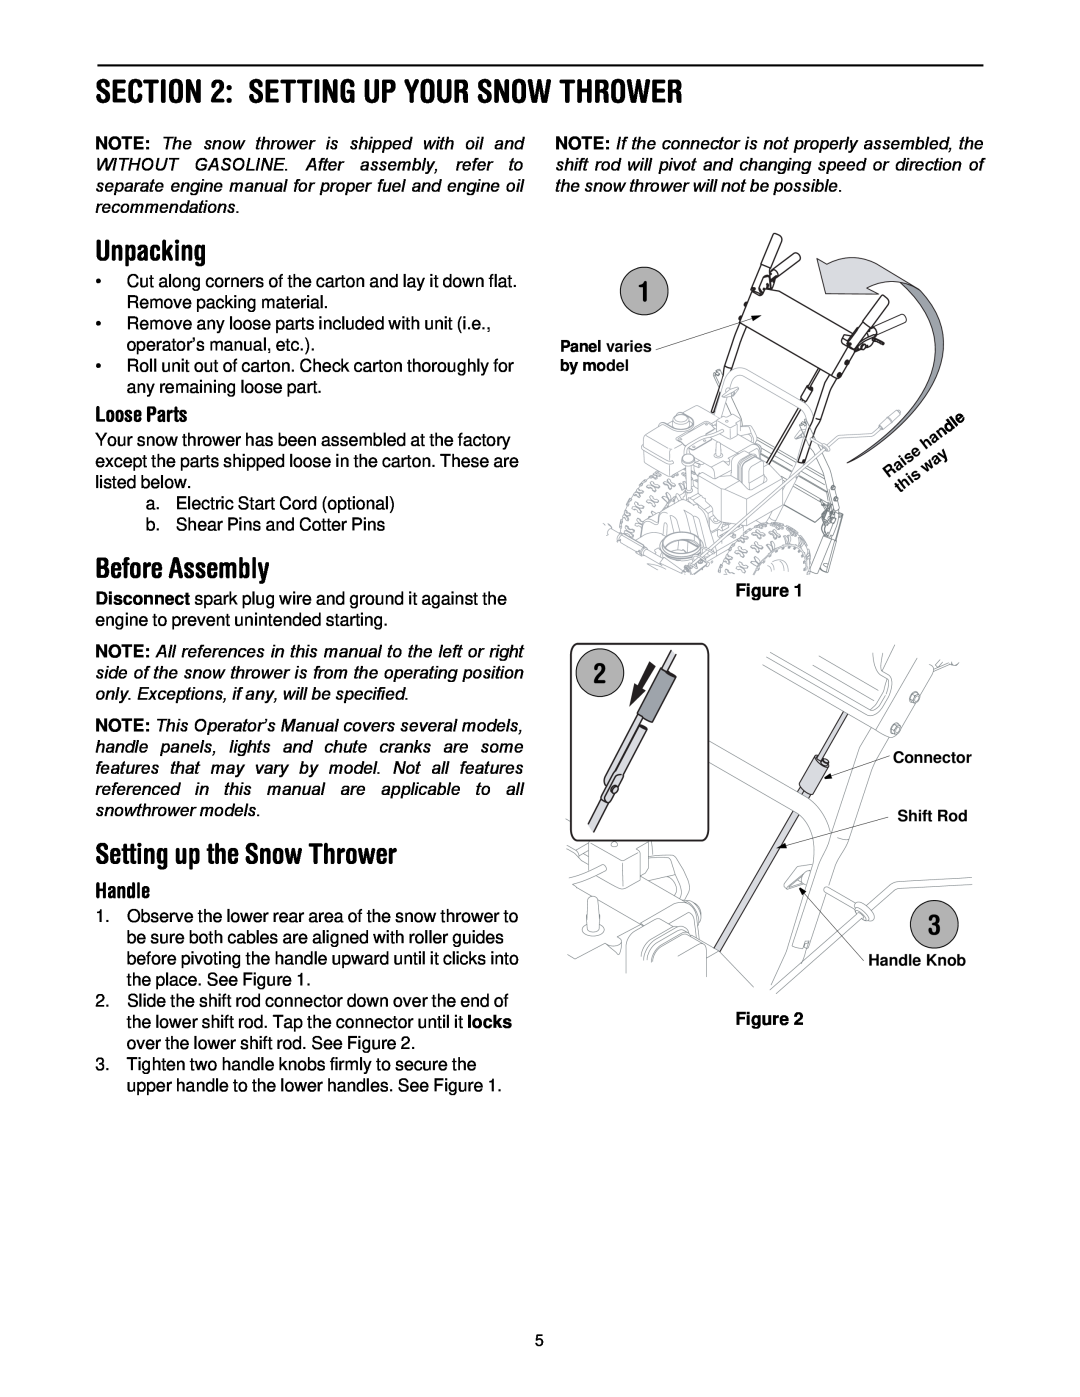 MTD 60-3753-6 Setting Up Your Snow Thrower, Unpacking, Before Assembly, Setting up the Snow Thrower, Loose Parts, Handle 